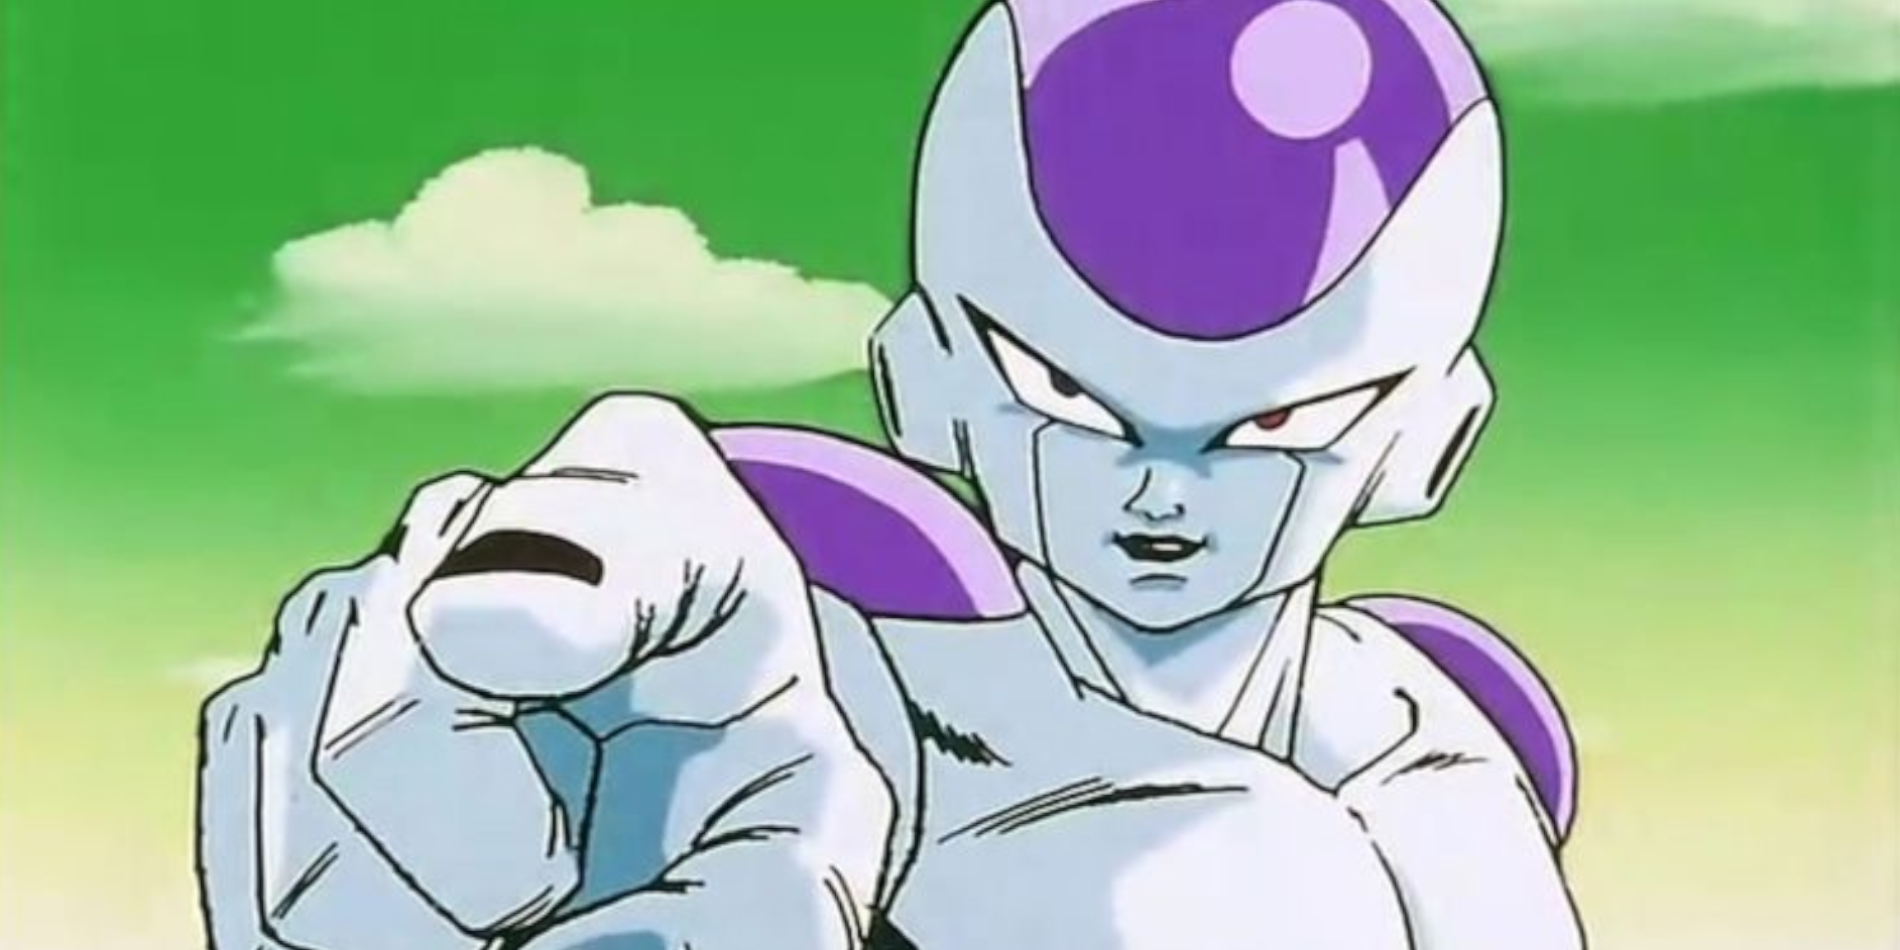 Frieza in his Final Form